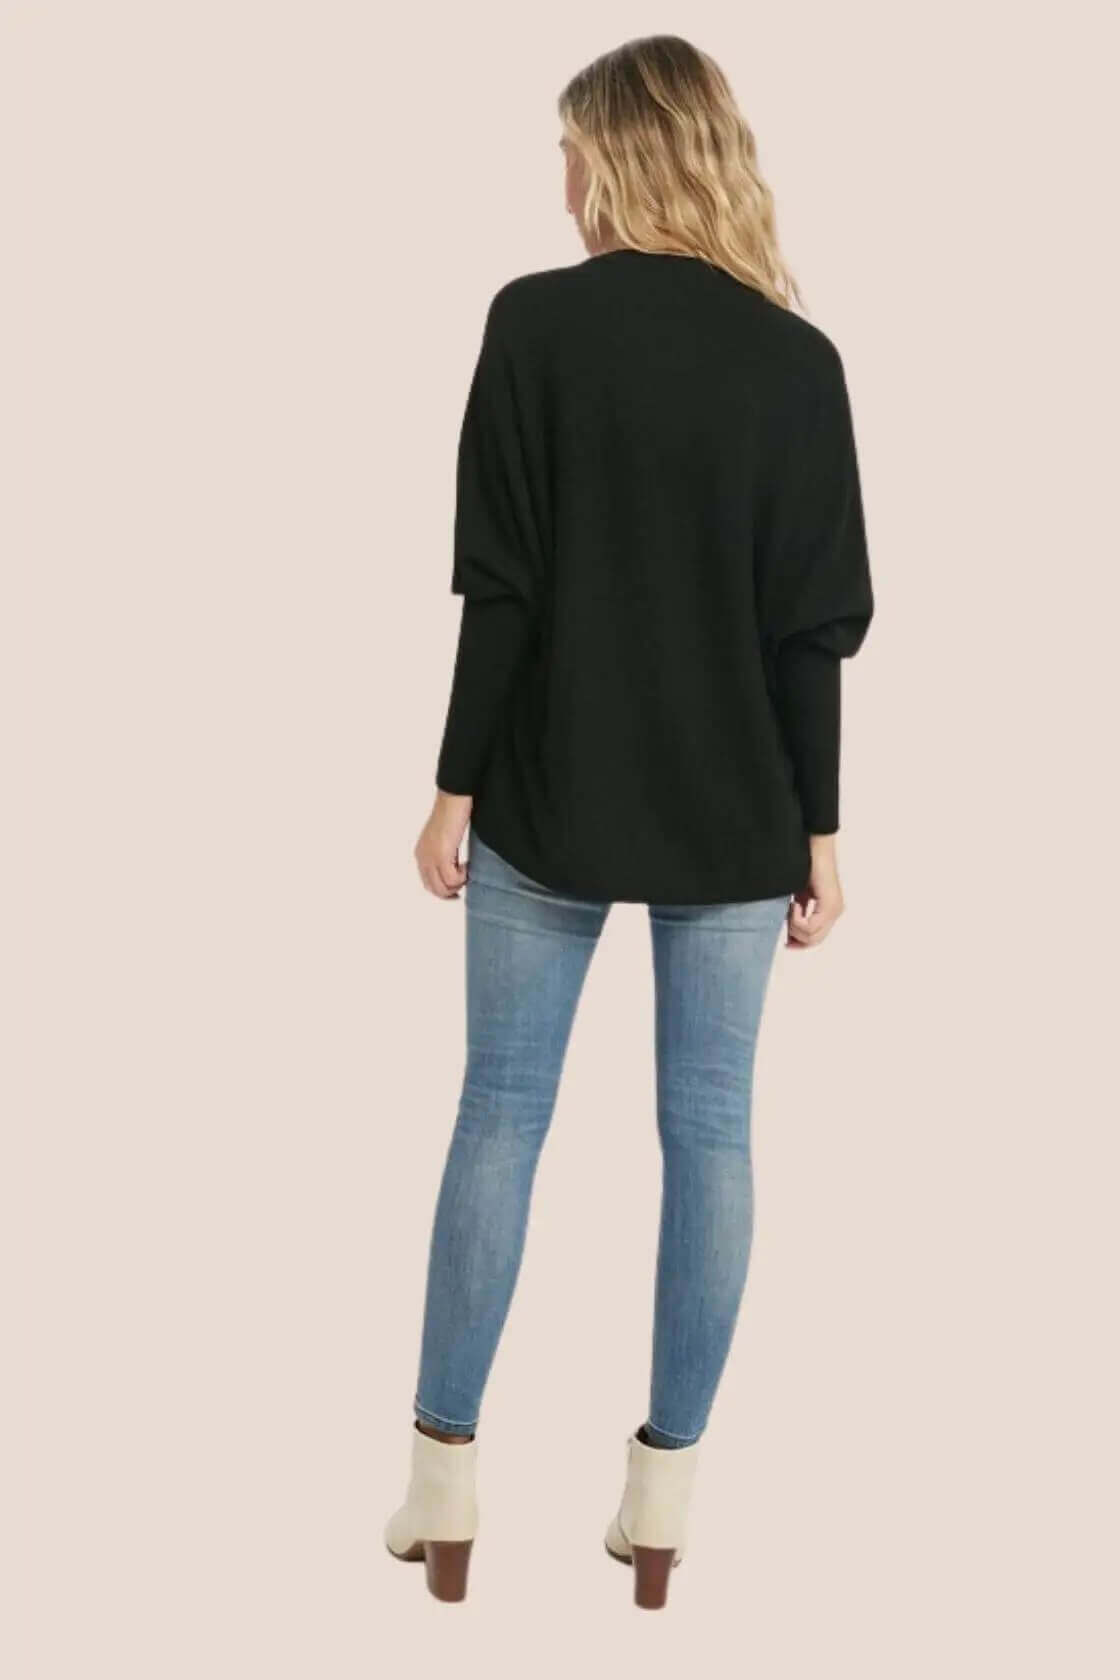 Black Pullover With Batwing Sleeves - Rocca & Co